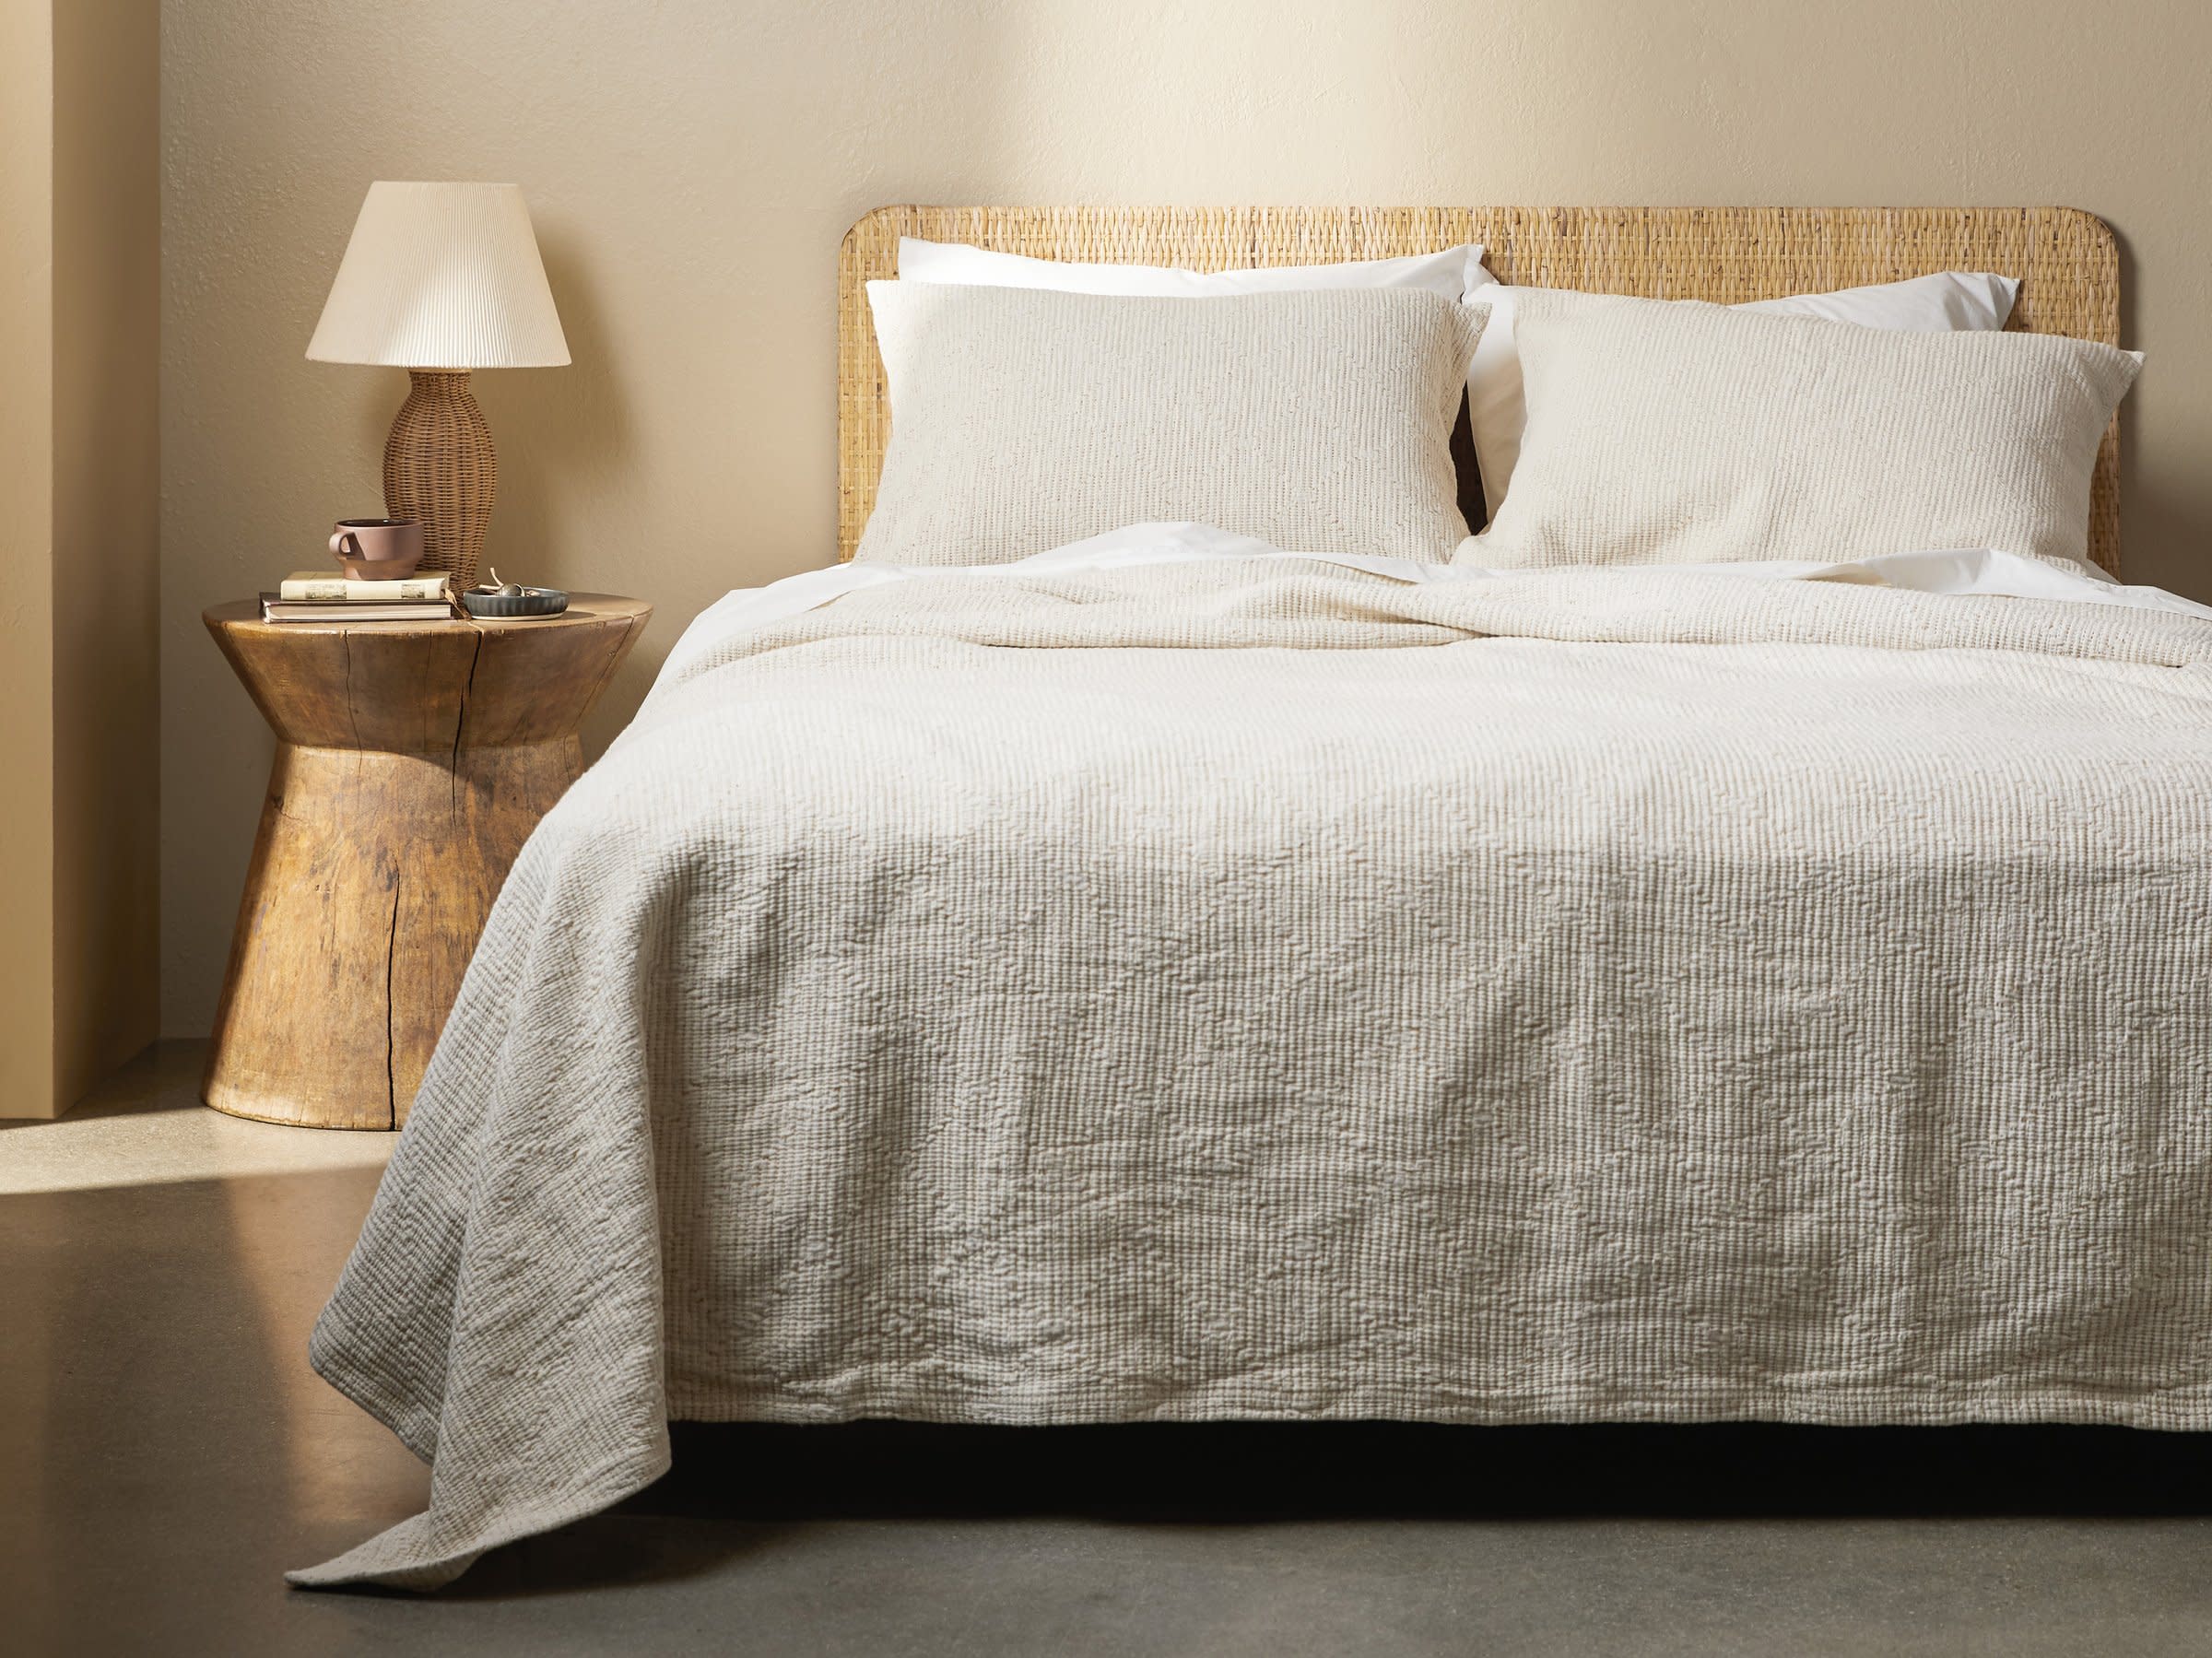 Cream And Ochre Linea Cotton Coverlet Shown In A Room